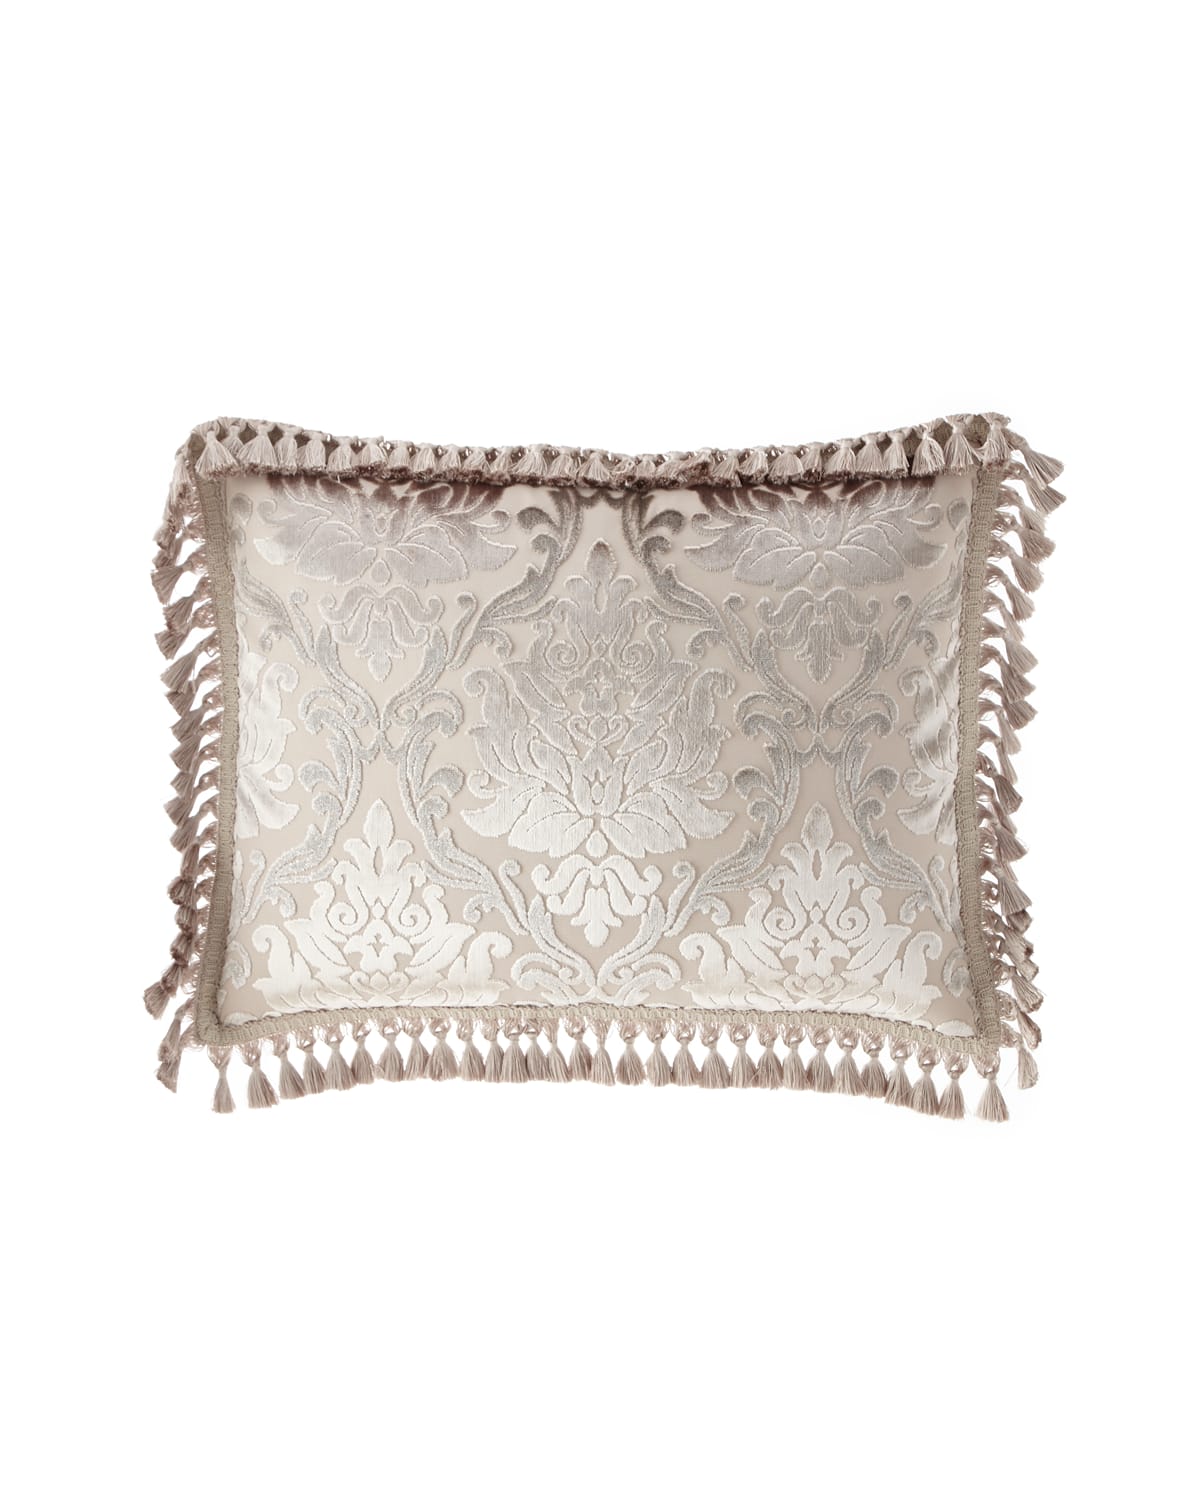 Image Dian Austin Couture Home Classic Damask King Sham